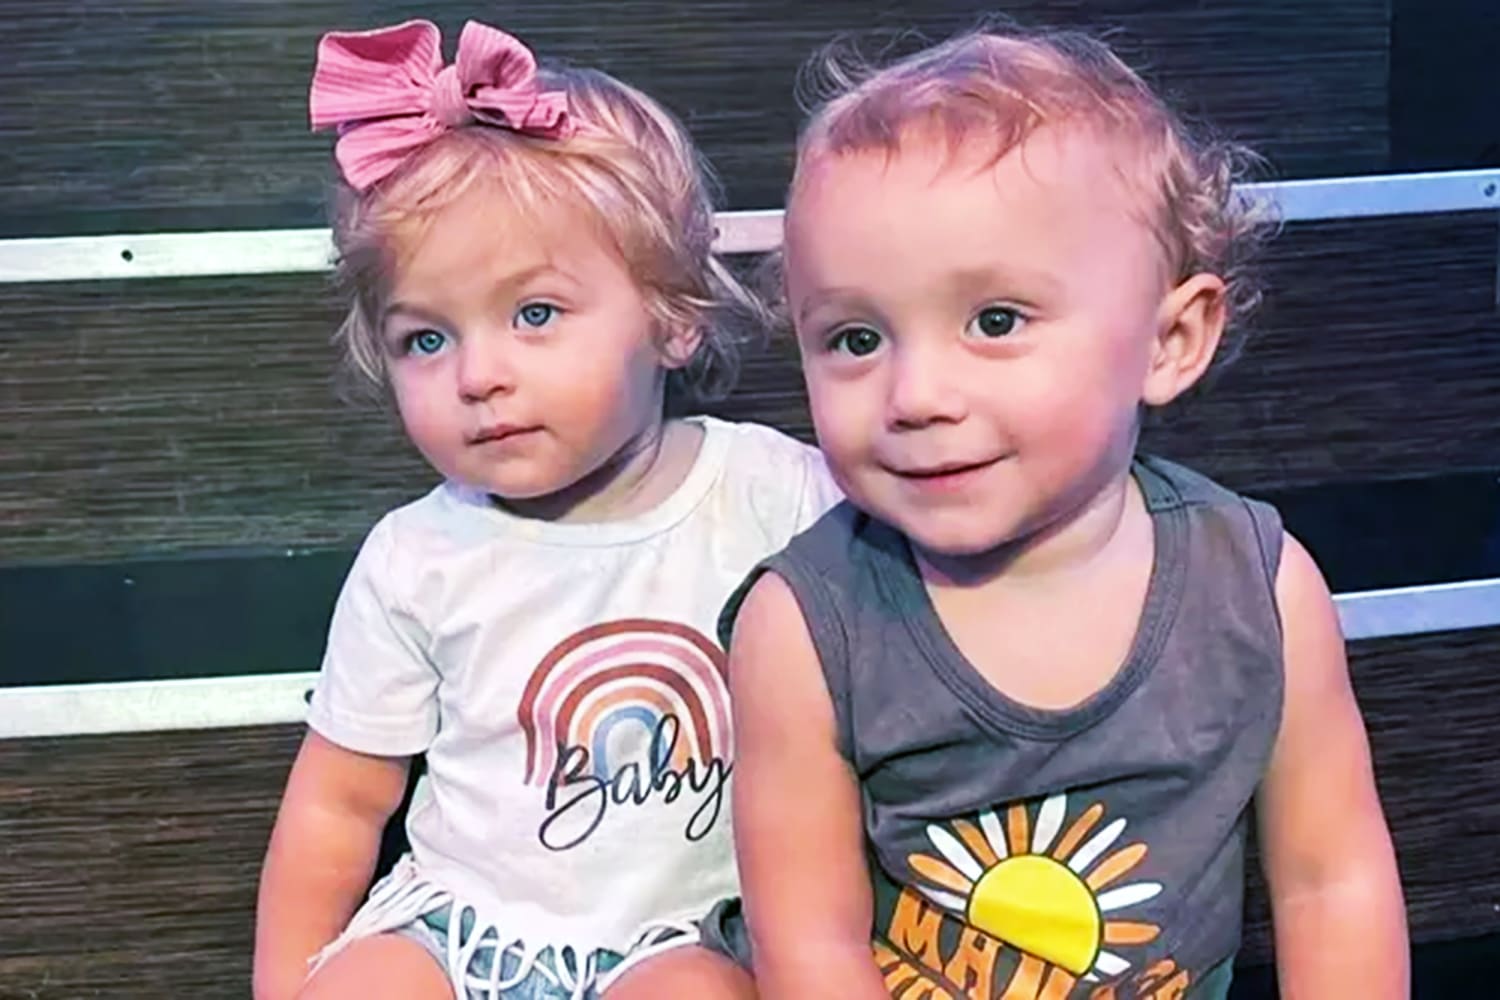 Oklahoma toddler twins drown in backyard pool after grandmother leaves door open, officials say